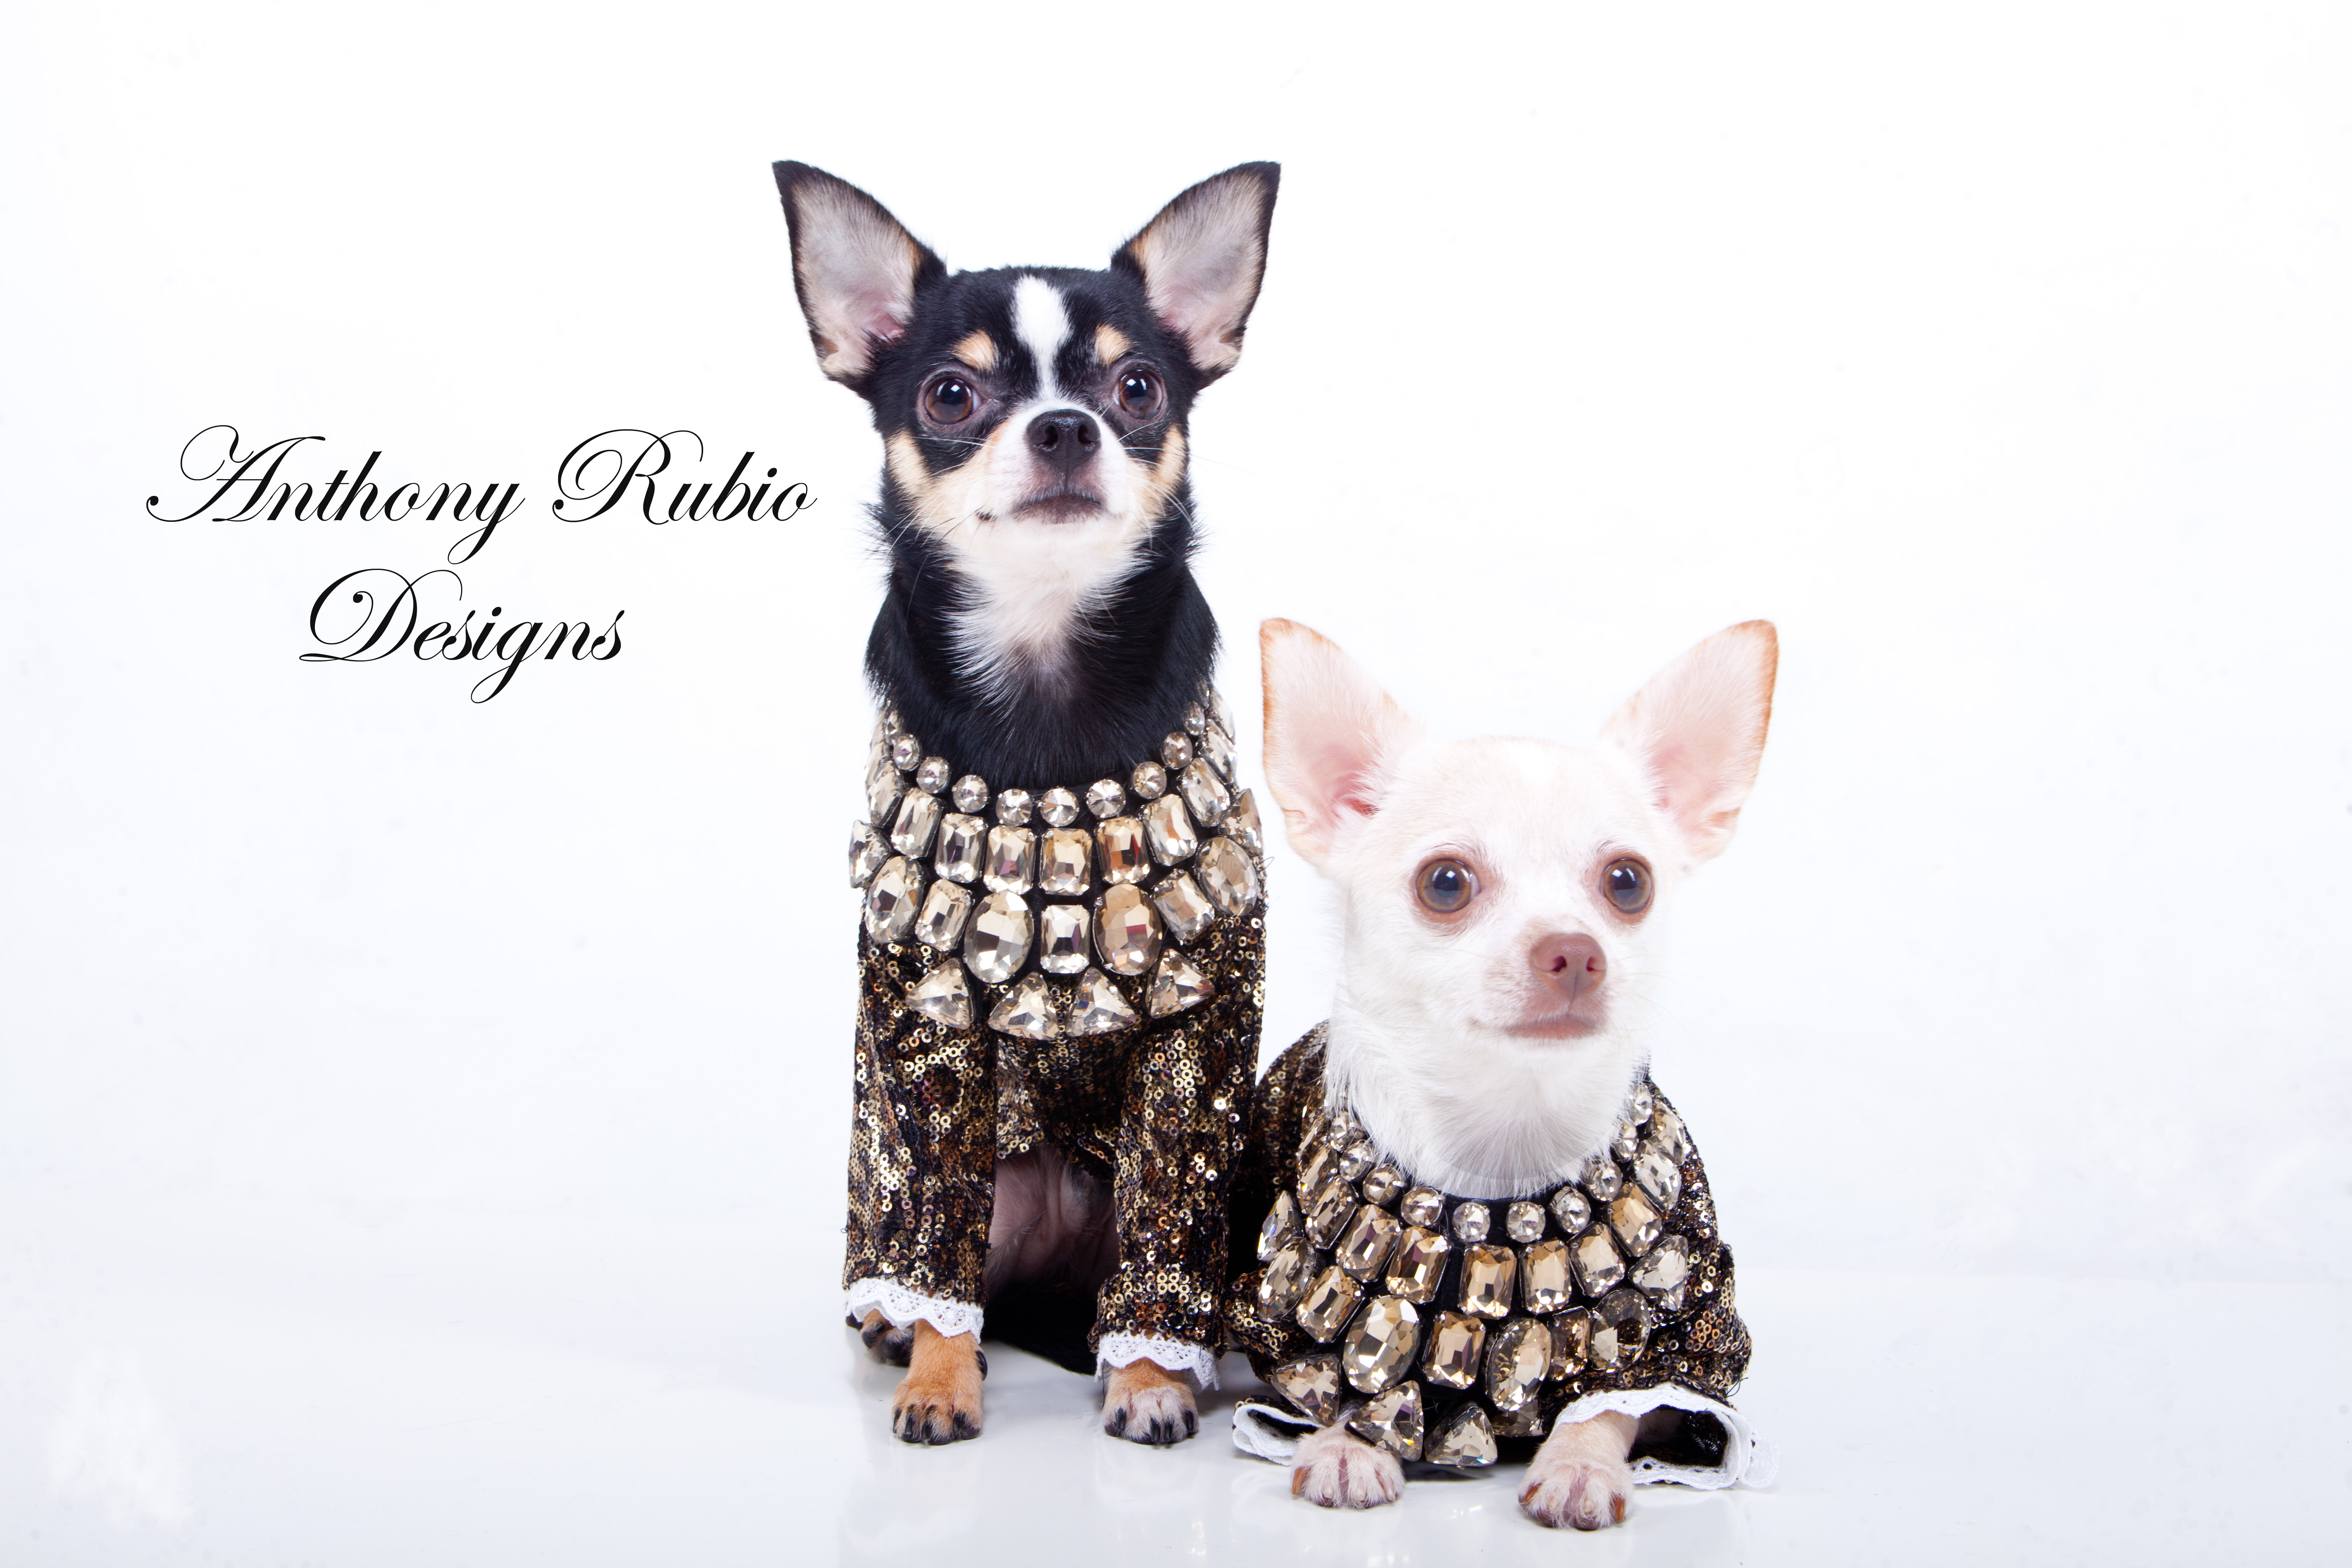 Bogie and Kimba are wearing Anthony Rubio Designs (Photo by Yoni Levy)